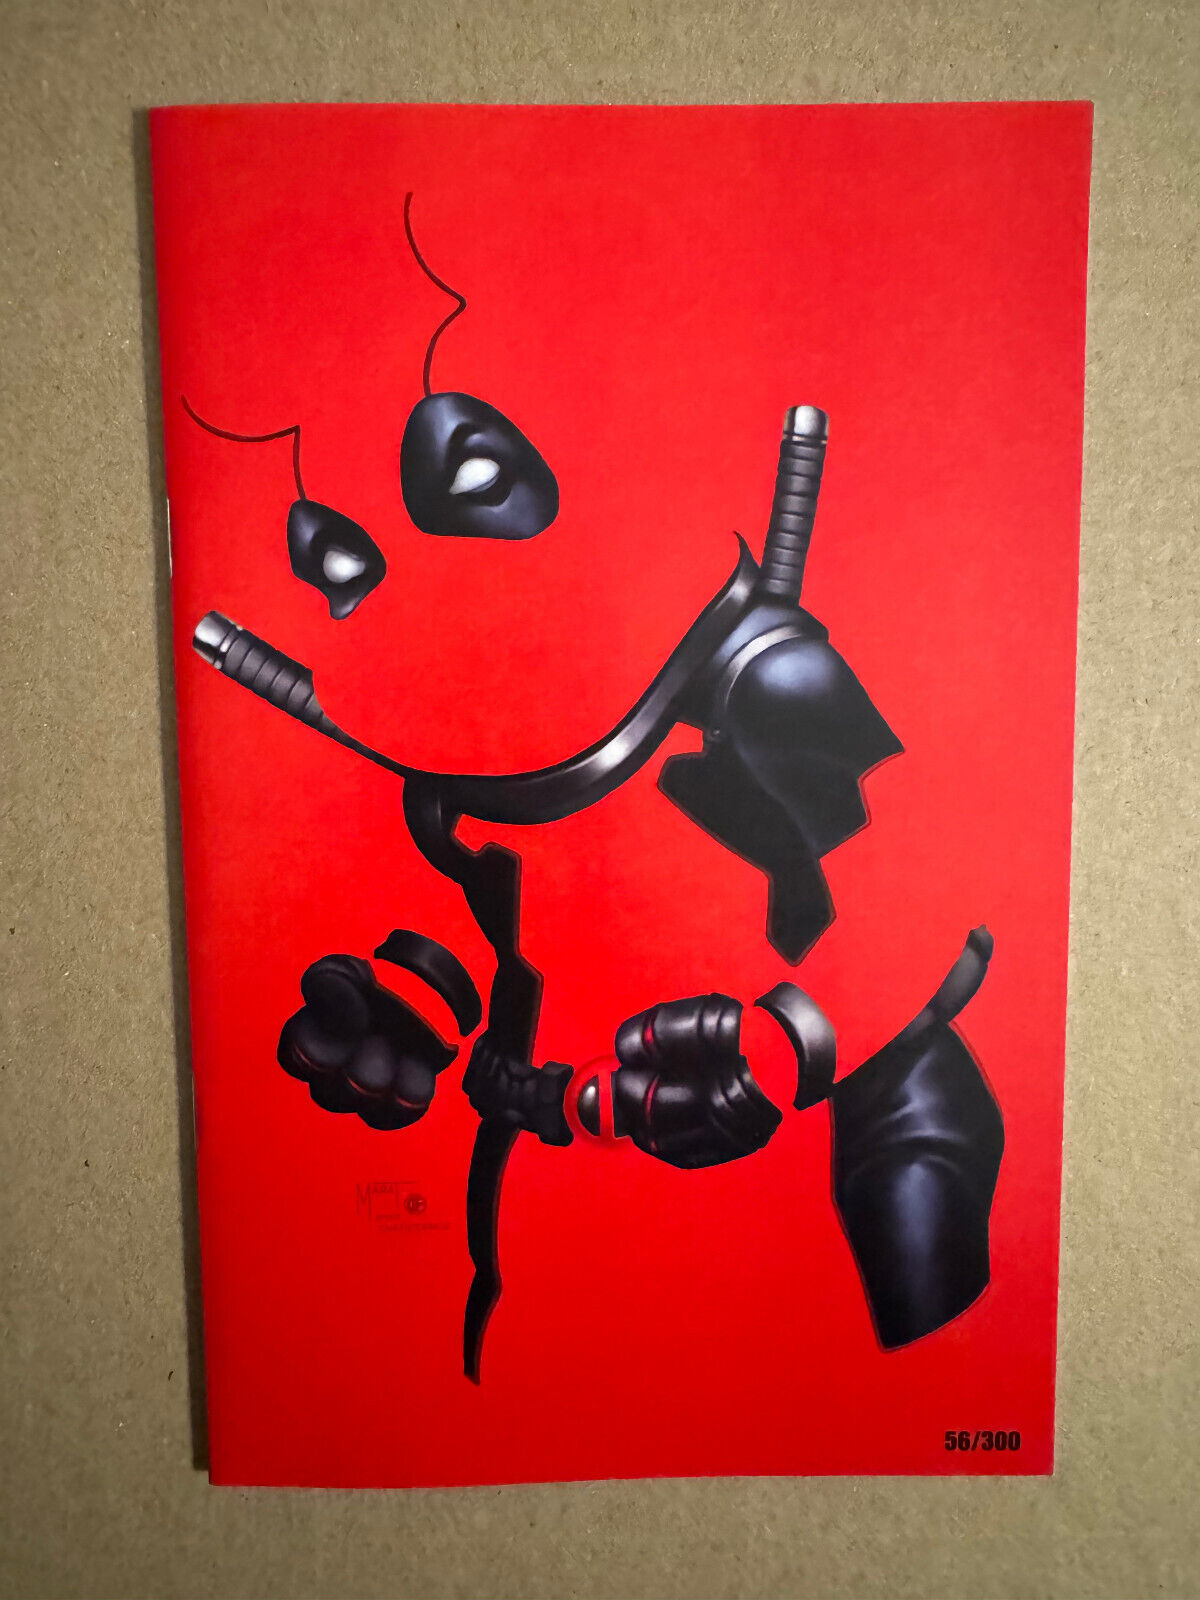 Do You Pooh: JTC Deadpool Negative Space Homage, #56/300 - NM+